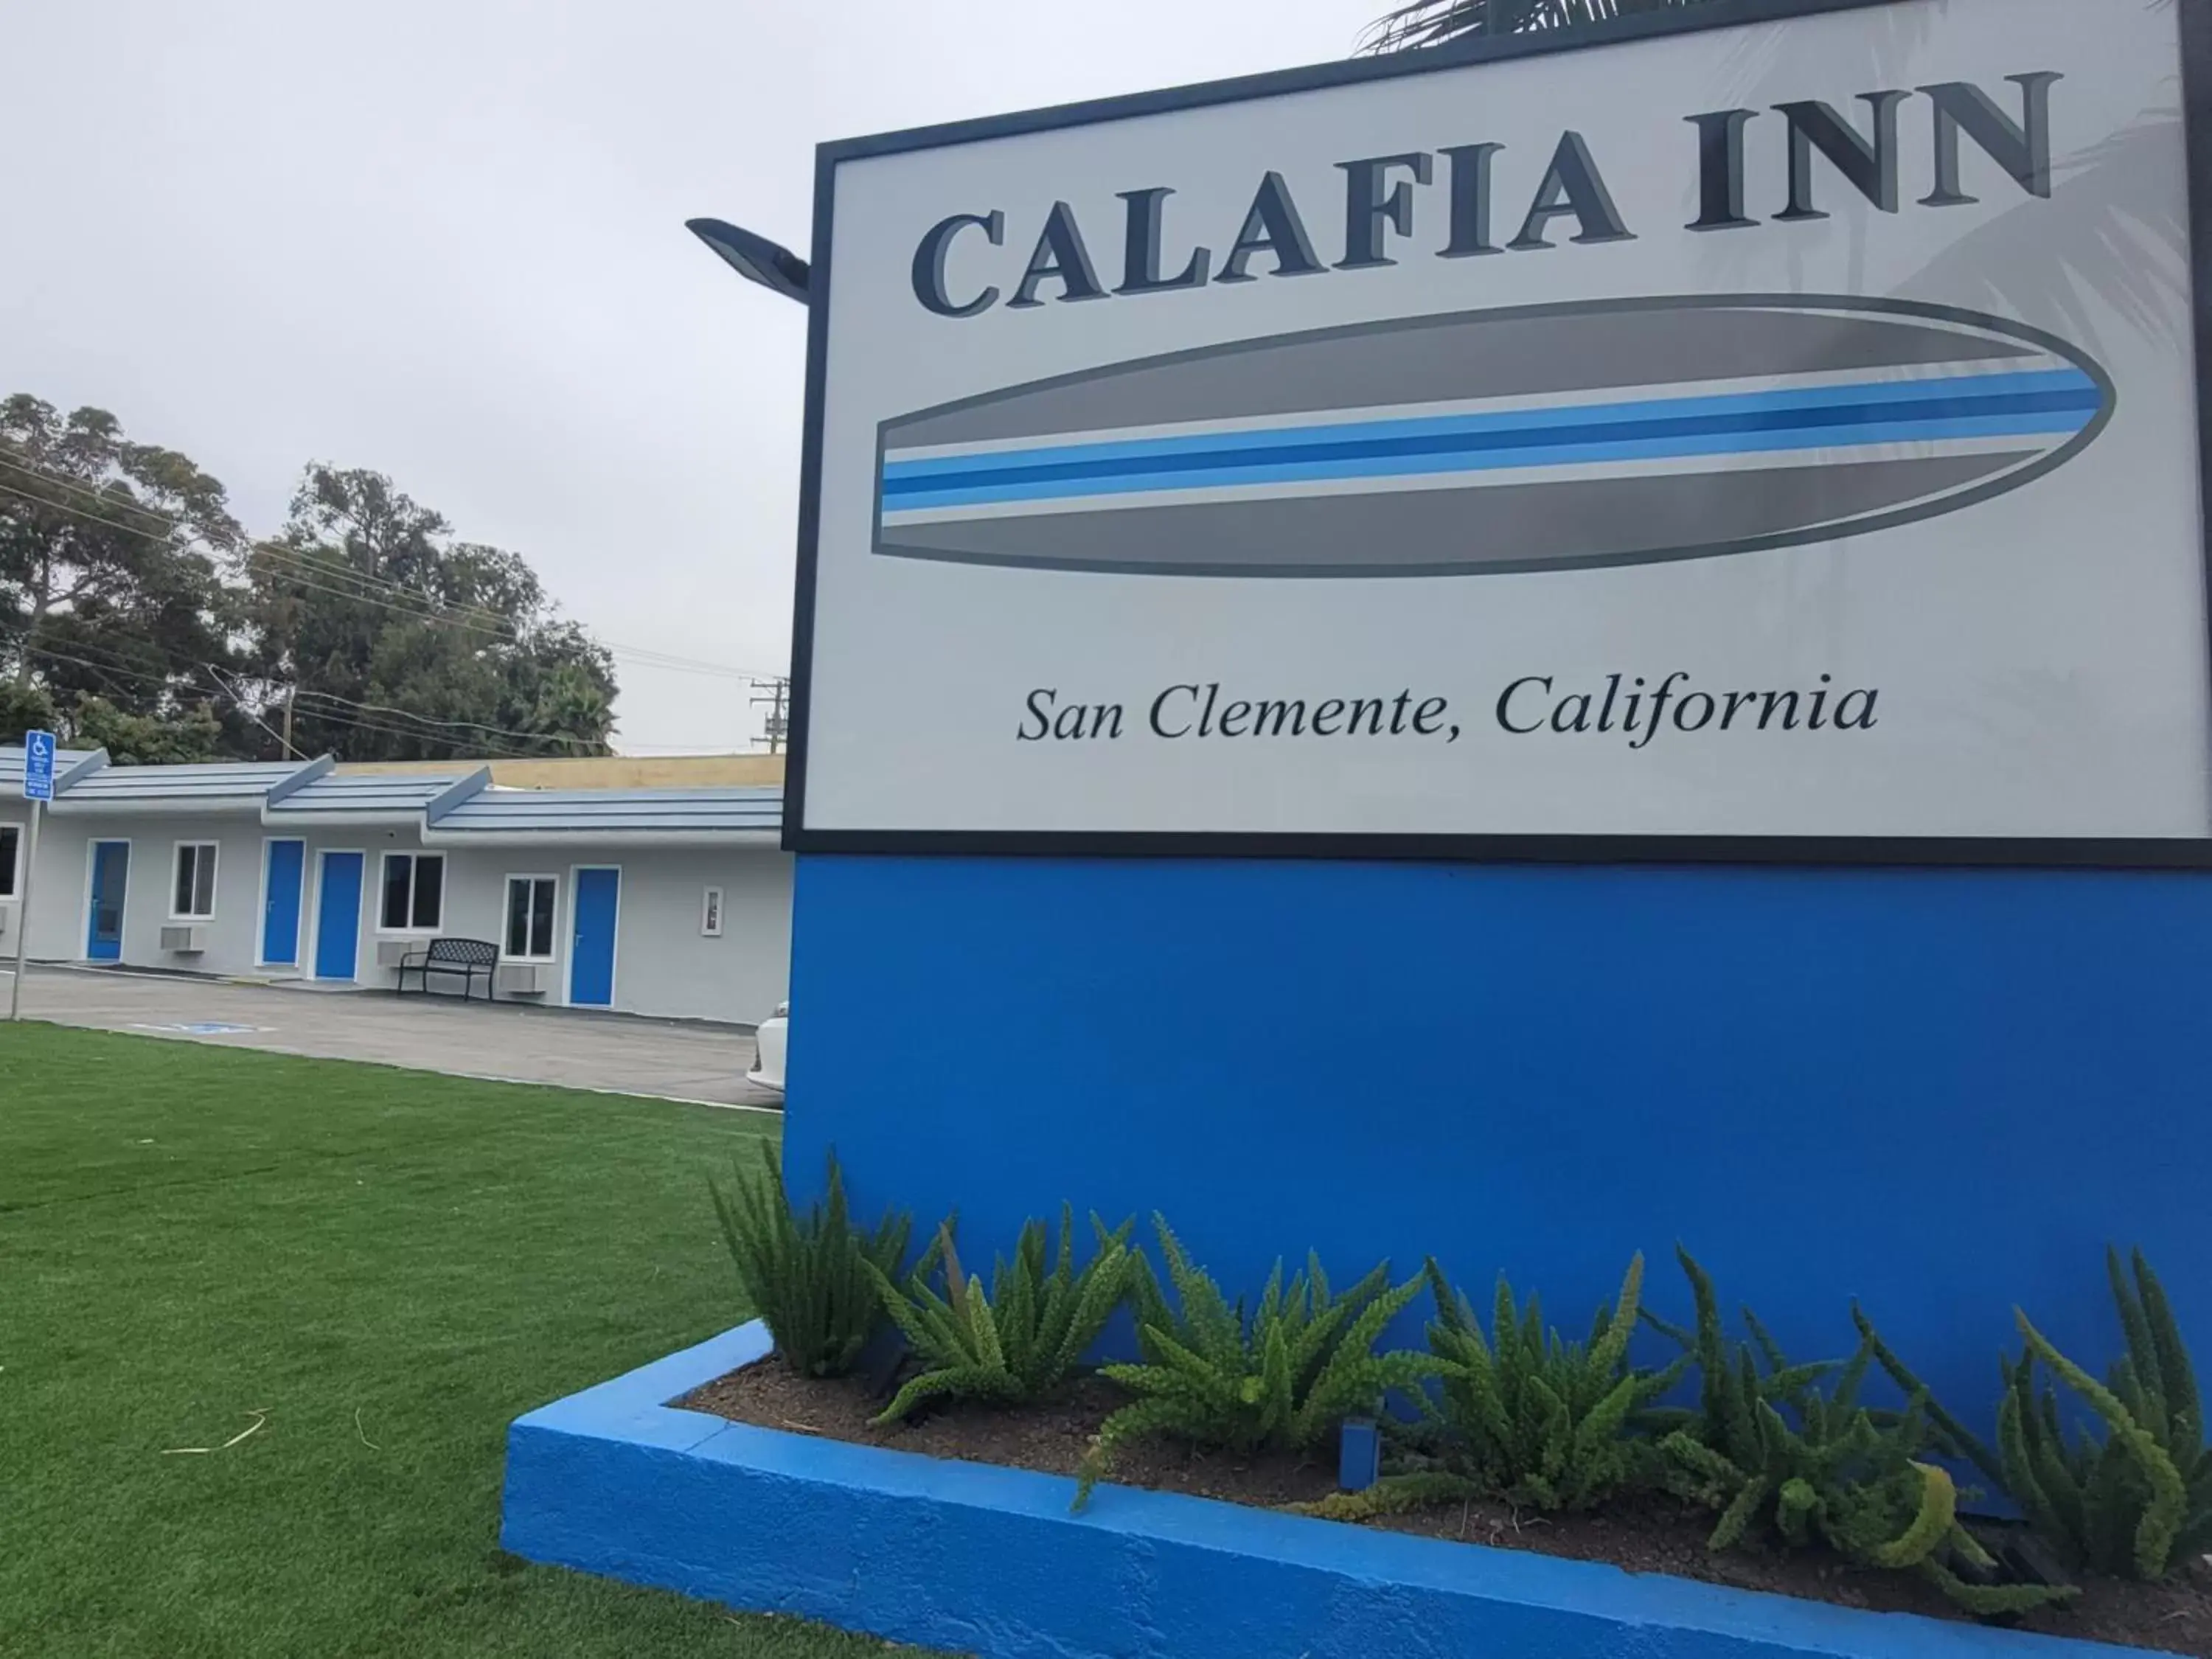 Property logo or sign, Property Building in Calafia Inn San Clemente Newly renovated